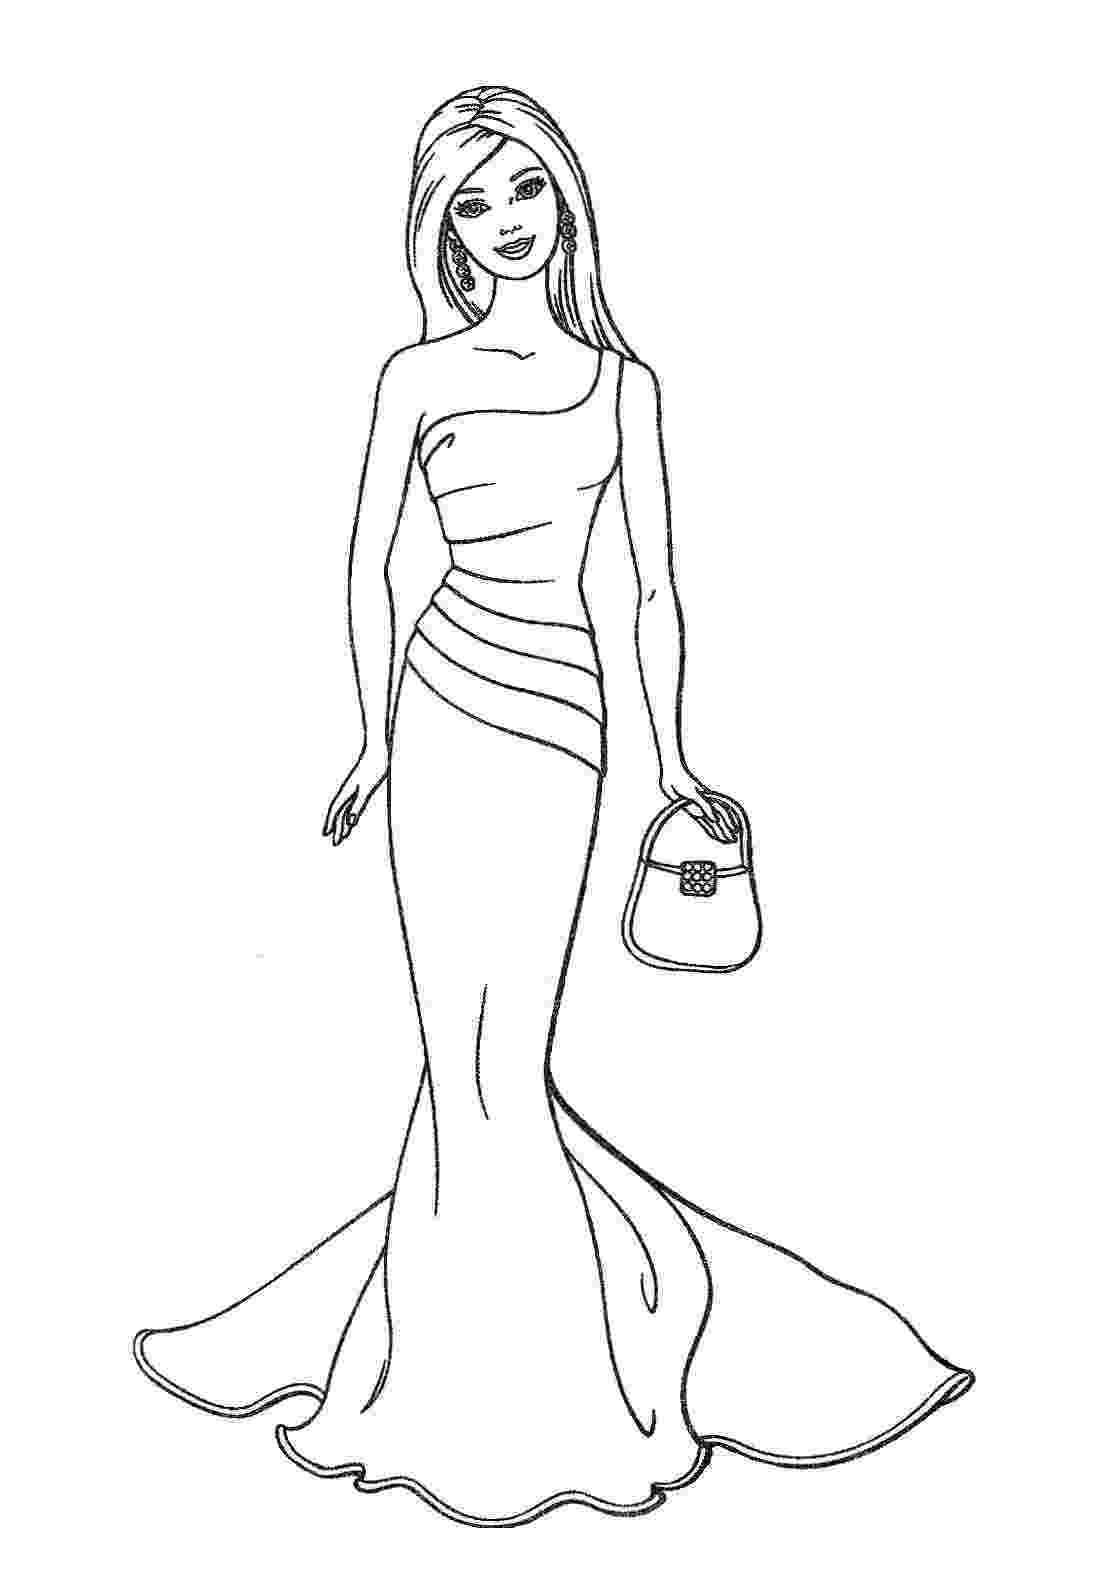 barbie printable colouring pages coloring barbie coloring pages for kids barbie colouring printable pages 